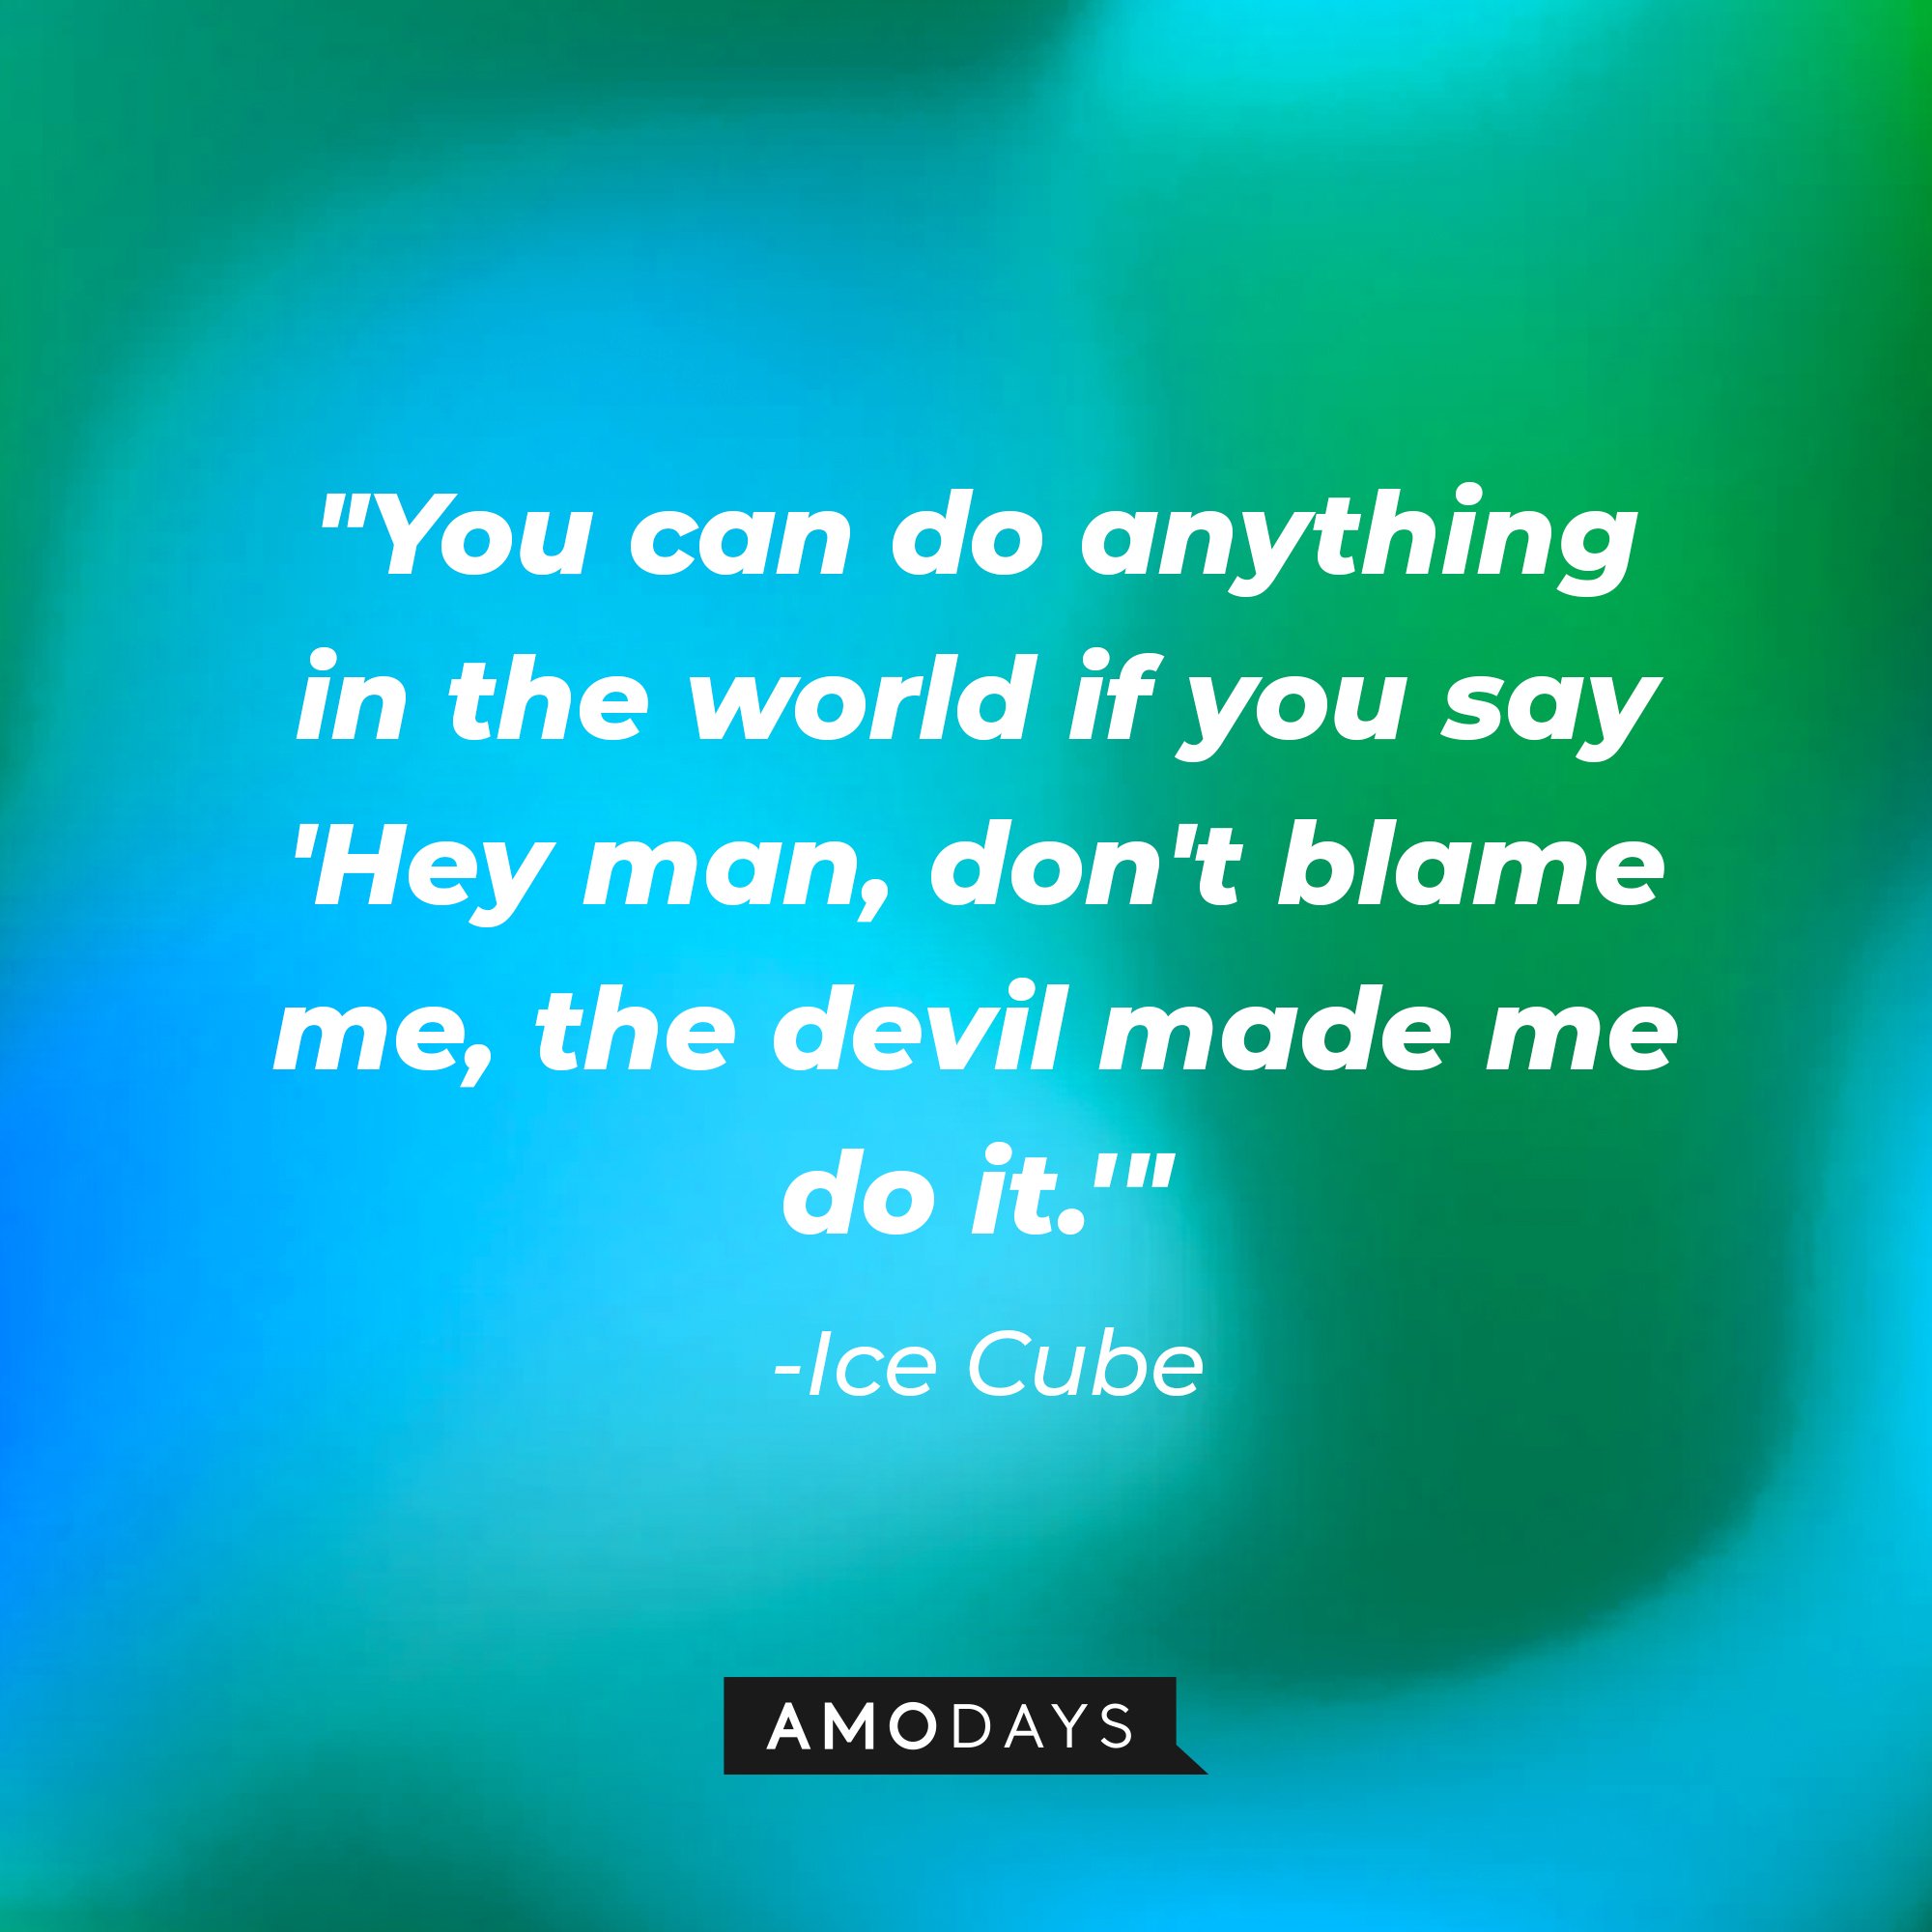 Ice Cube's quote: "You can do anything in the world if you say 'Hey man, don't blame me, the devil made me do it.'" — Ice Cube | Image: AmoDays